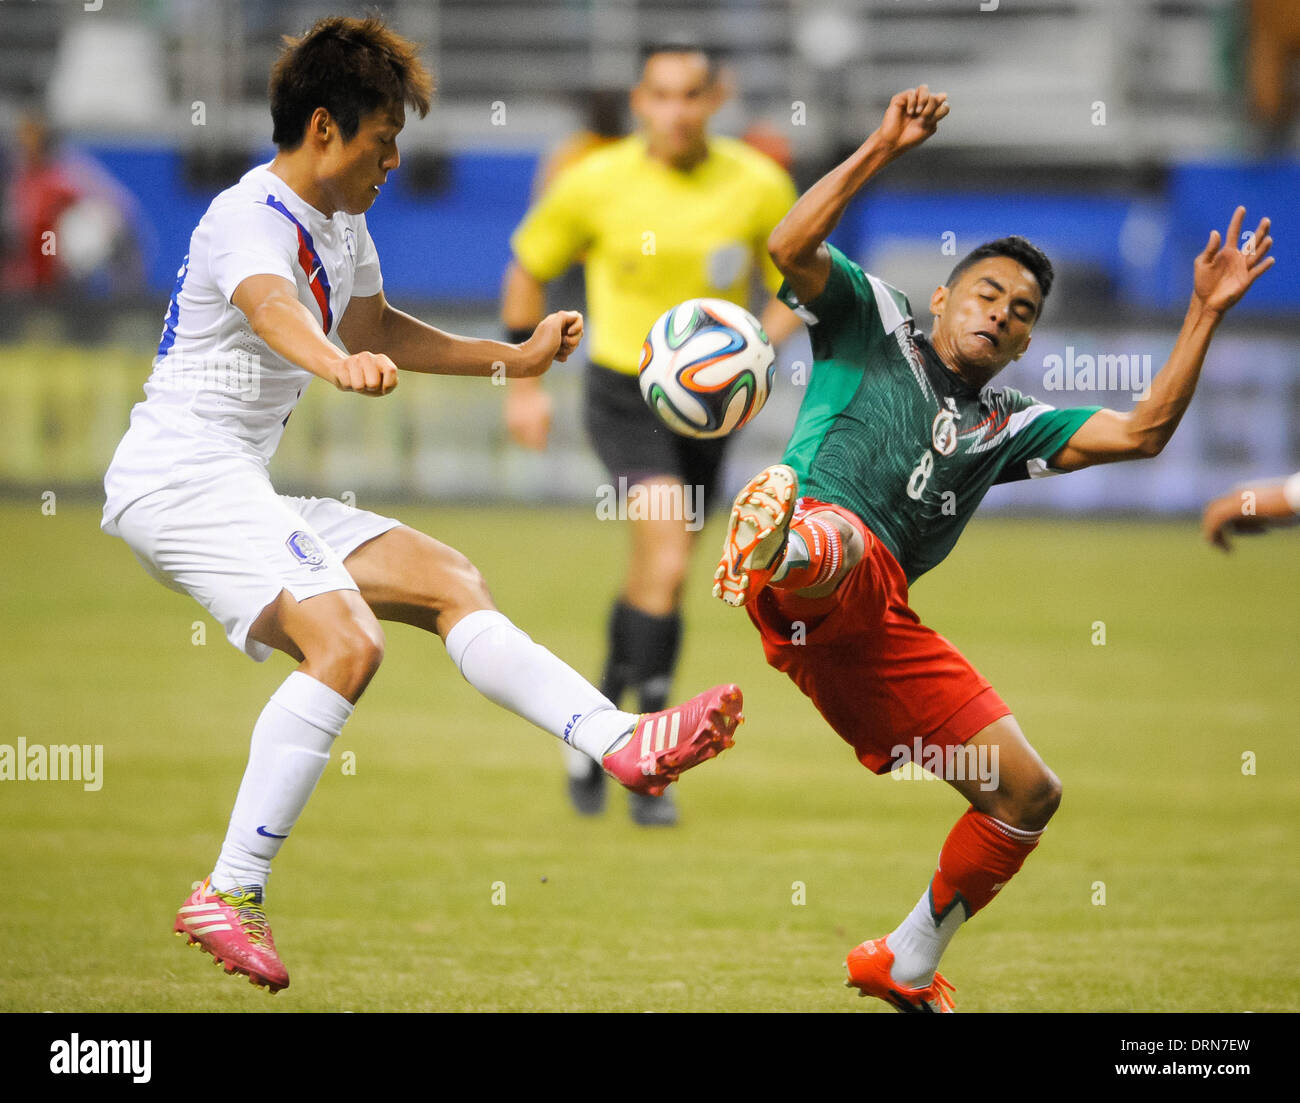 San Antonio, Texas, USA. 29th Jan, 2014. Korea's Lee Myung-Joo, left, and Mexico's Juan Jose Vazquez try to control the ball in the first half. The Mexican national team defeated South Korea 4-0 in an international friendly Wednesday, January 29, 2014 at the Alamodome in San Antonio, Texas. Credit:  Bahram Mark Sobhani/ZUMAPRESS.com/Alamy Live News Stock Photo